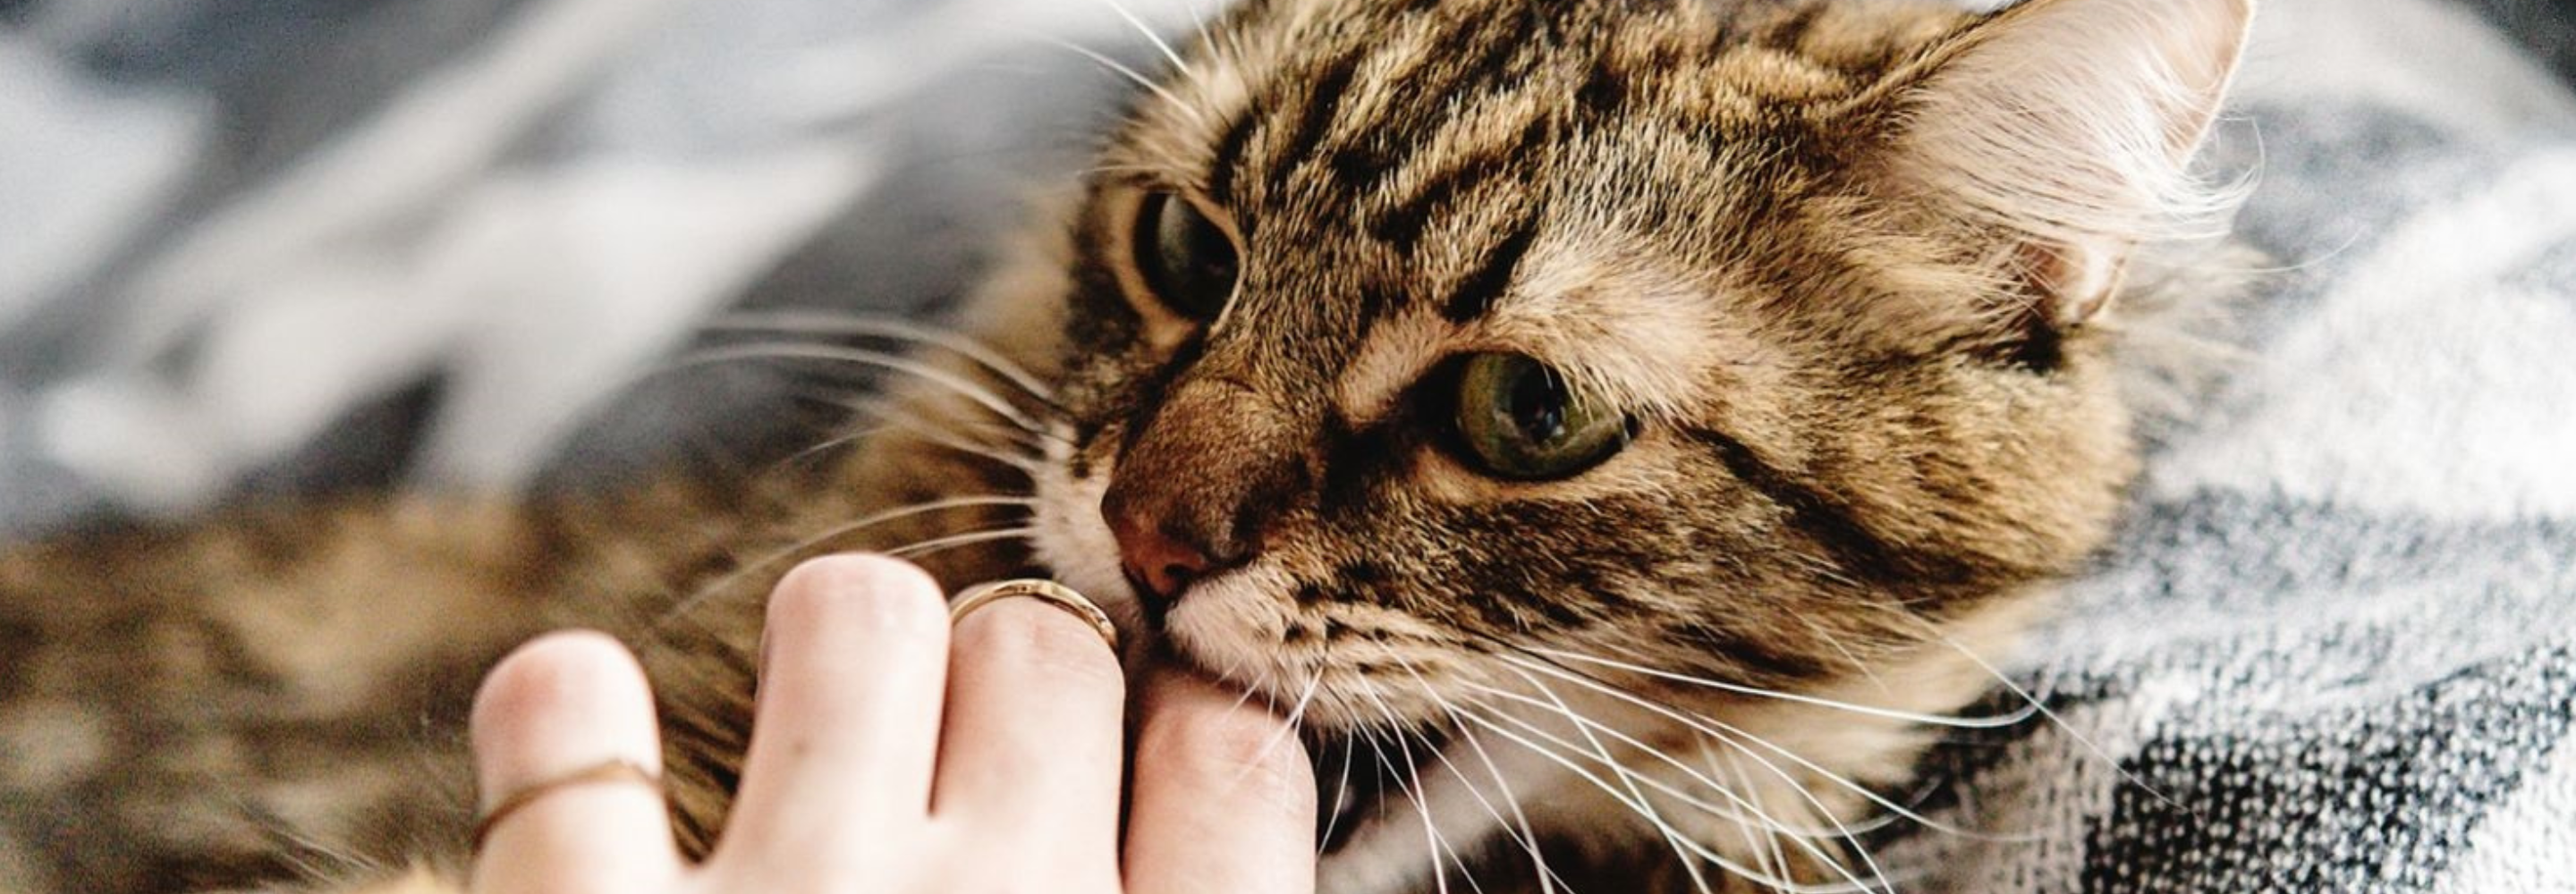 Why Cats Suddenly Bite While Petting Them?